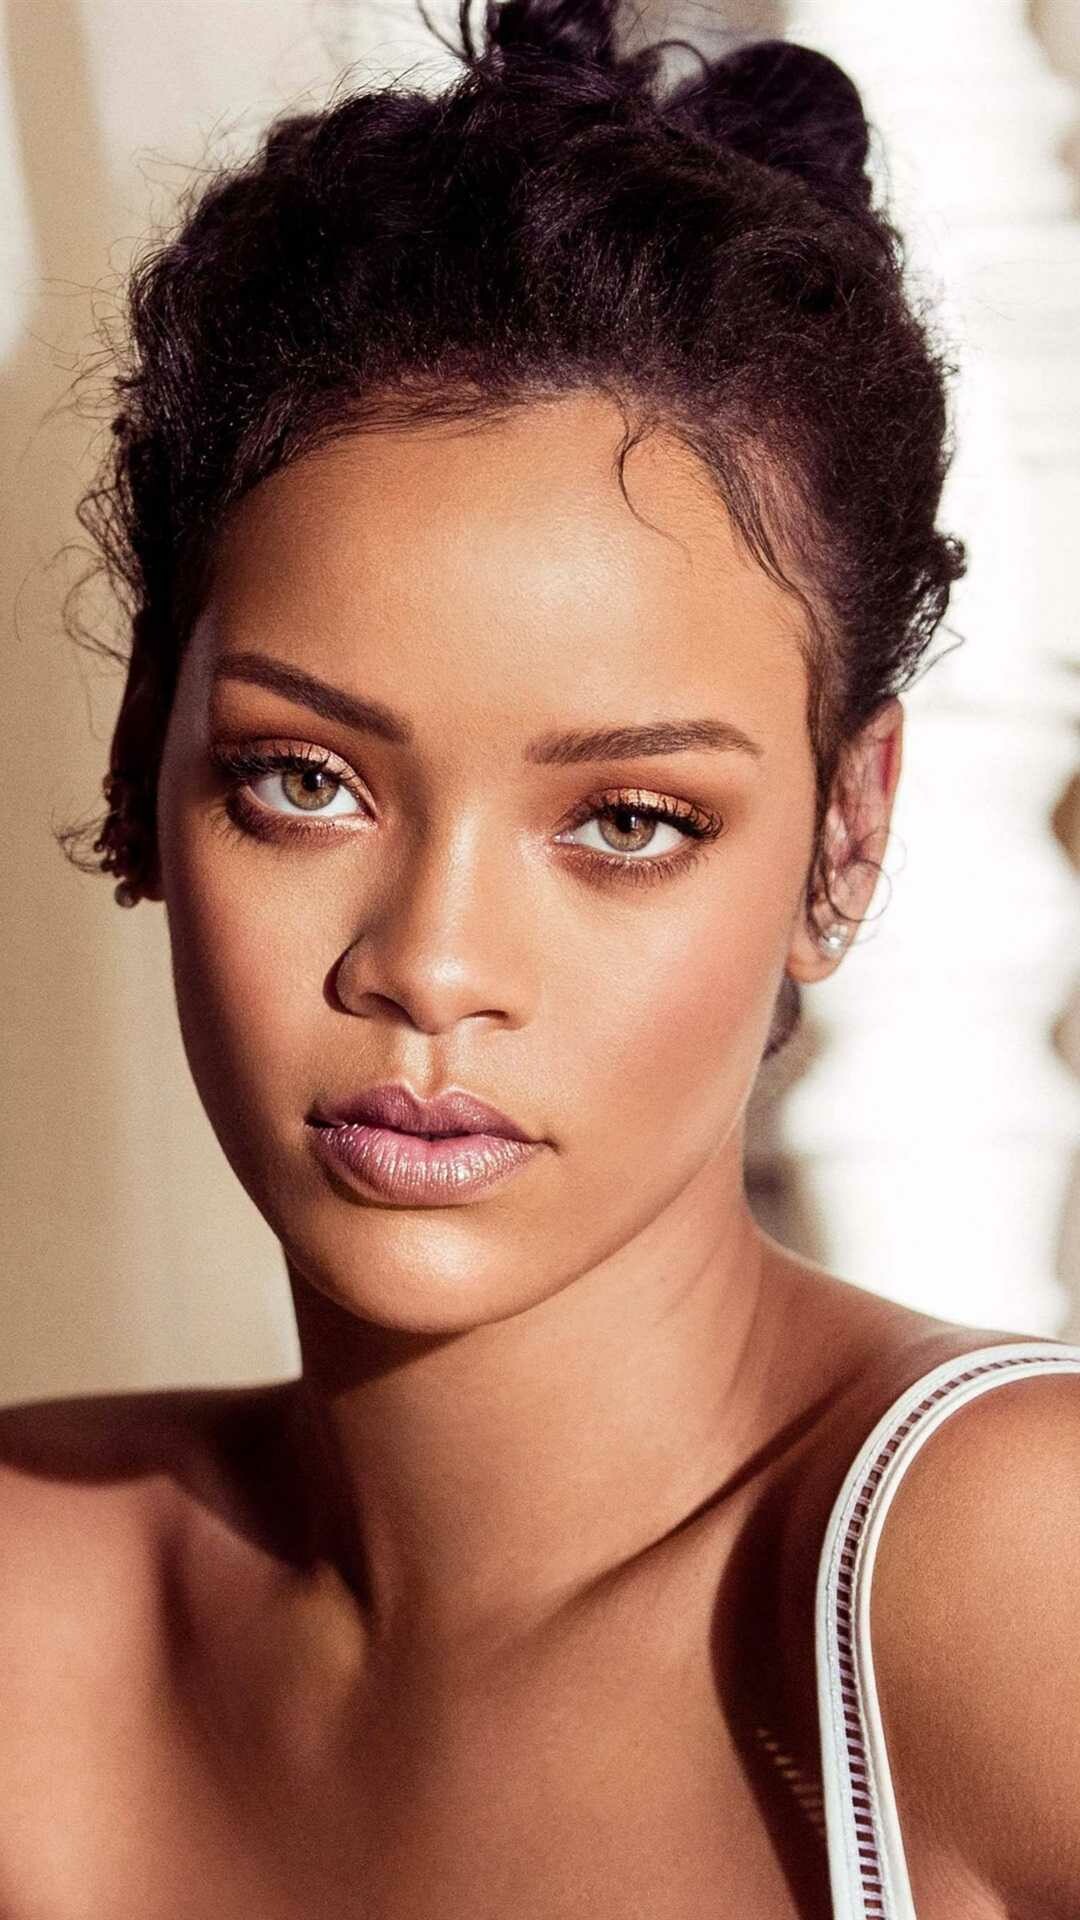 Rihanna: “Where Have You Been”, Peaked at number five on the Billboard Hot 100. 1080x1920 Full HD Wallpaper.